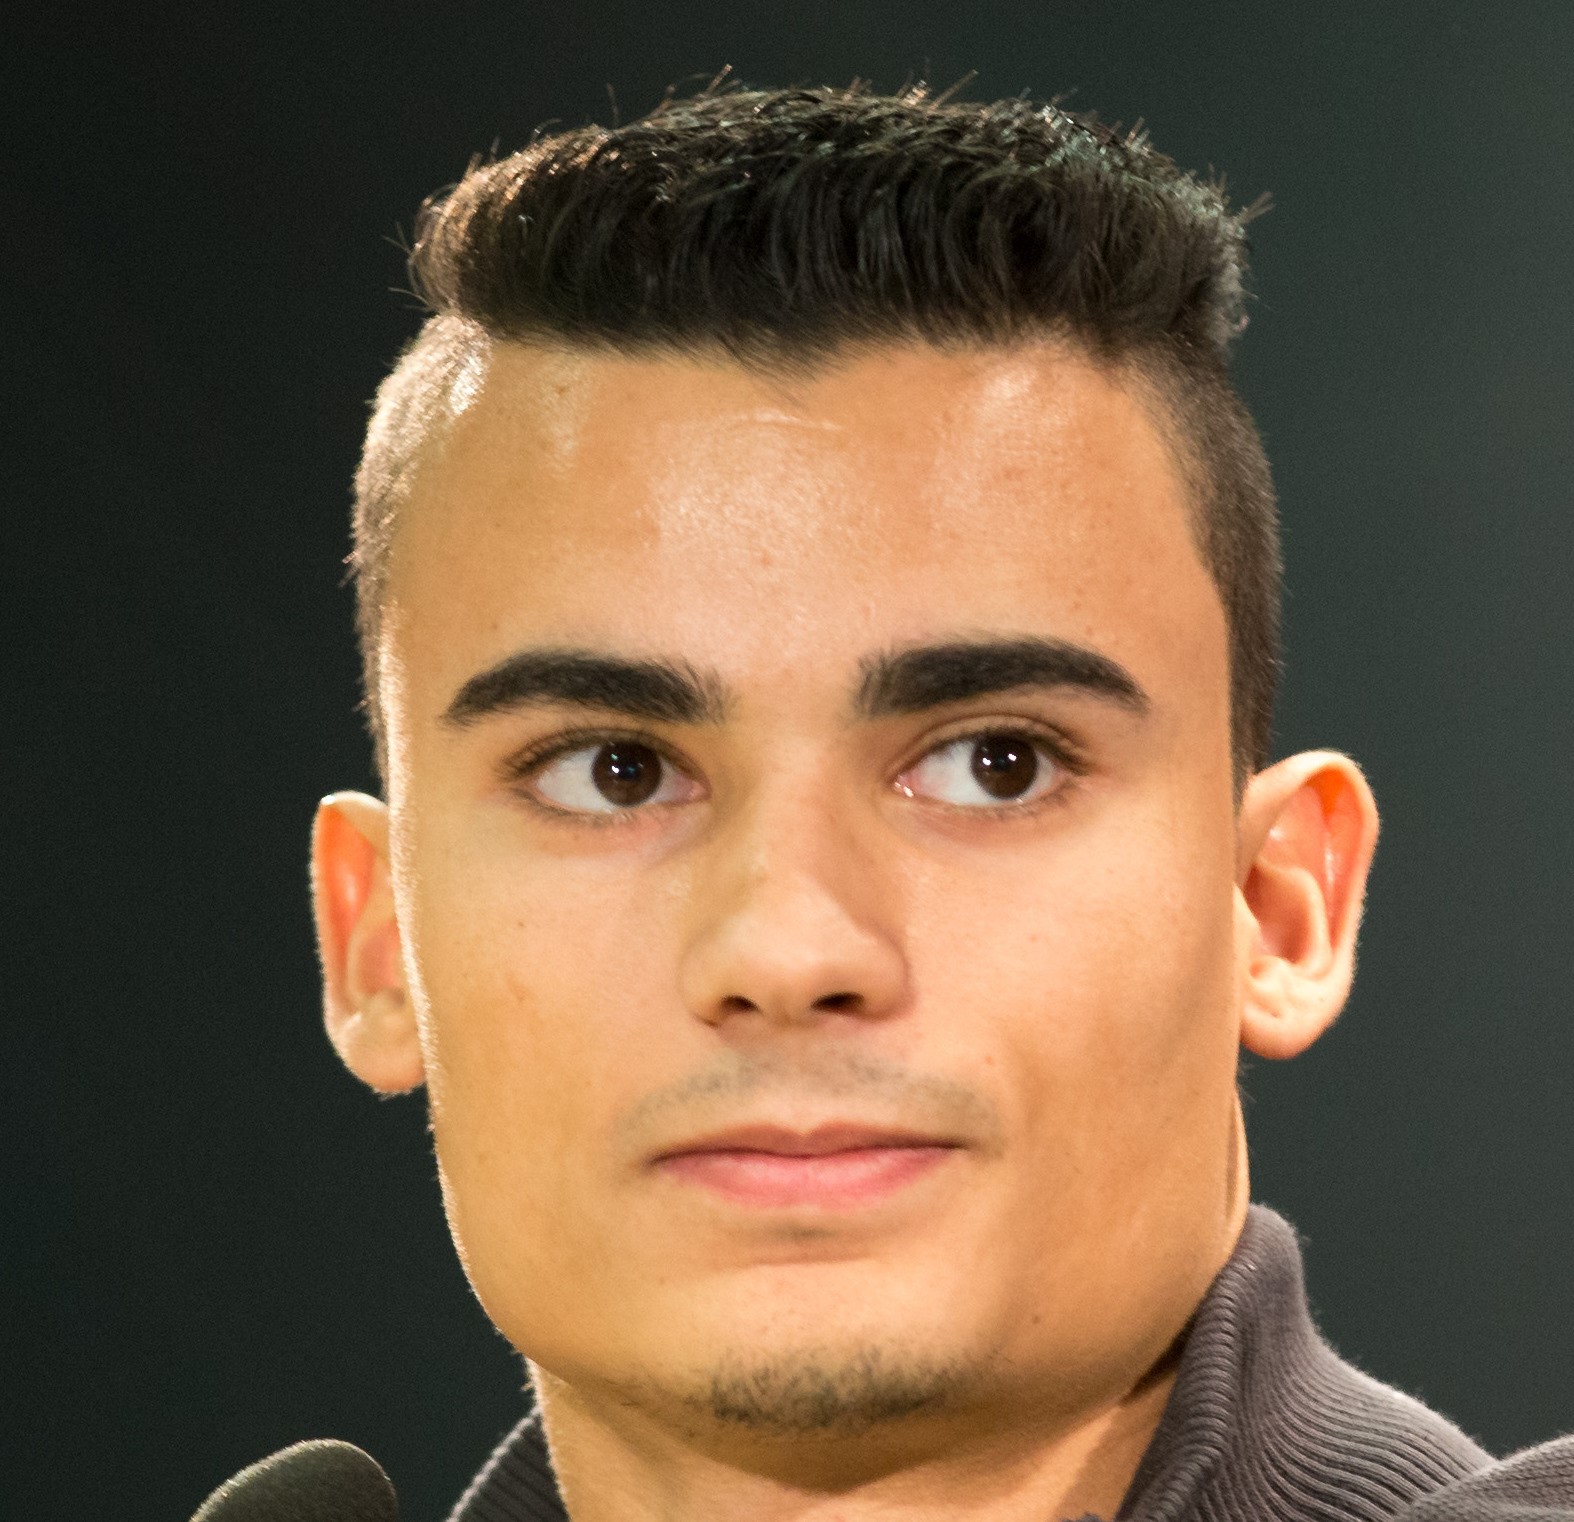 Wehrlein comes from driving front-engine cars. How will he do in rear engine open wheel cars? Time will tell.